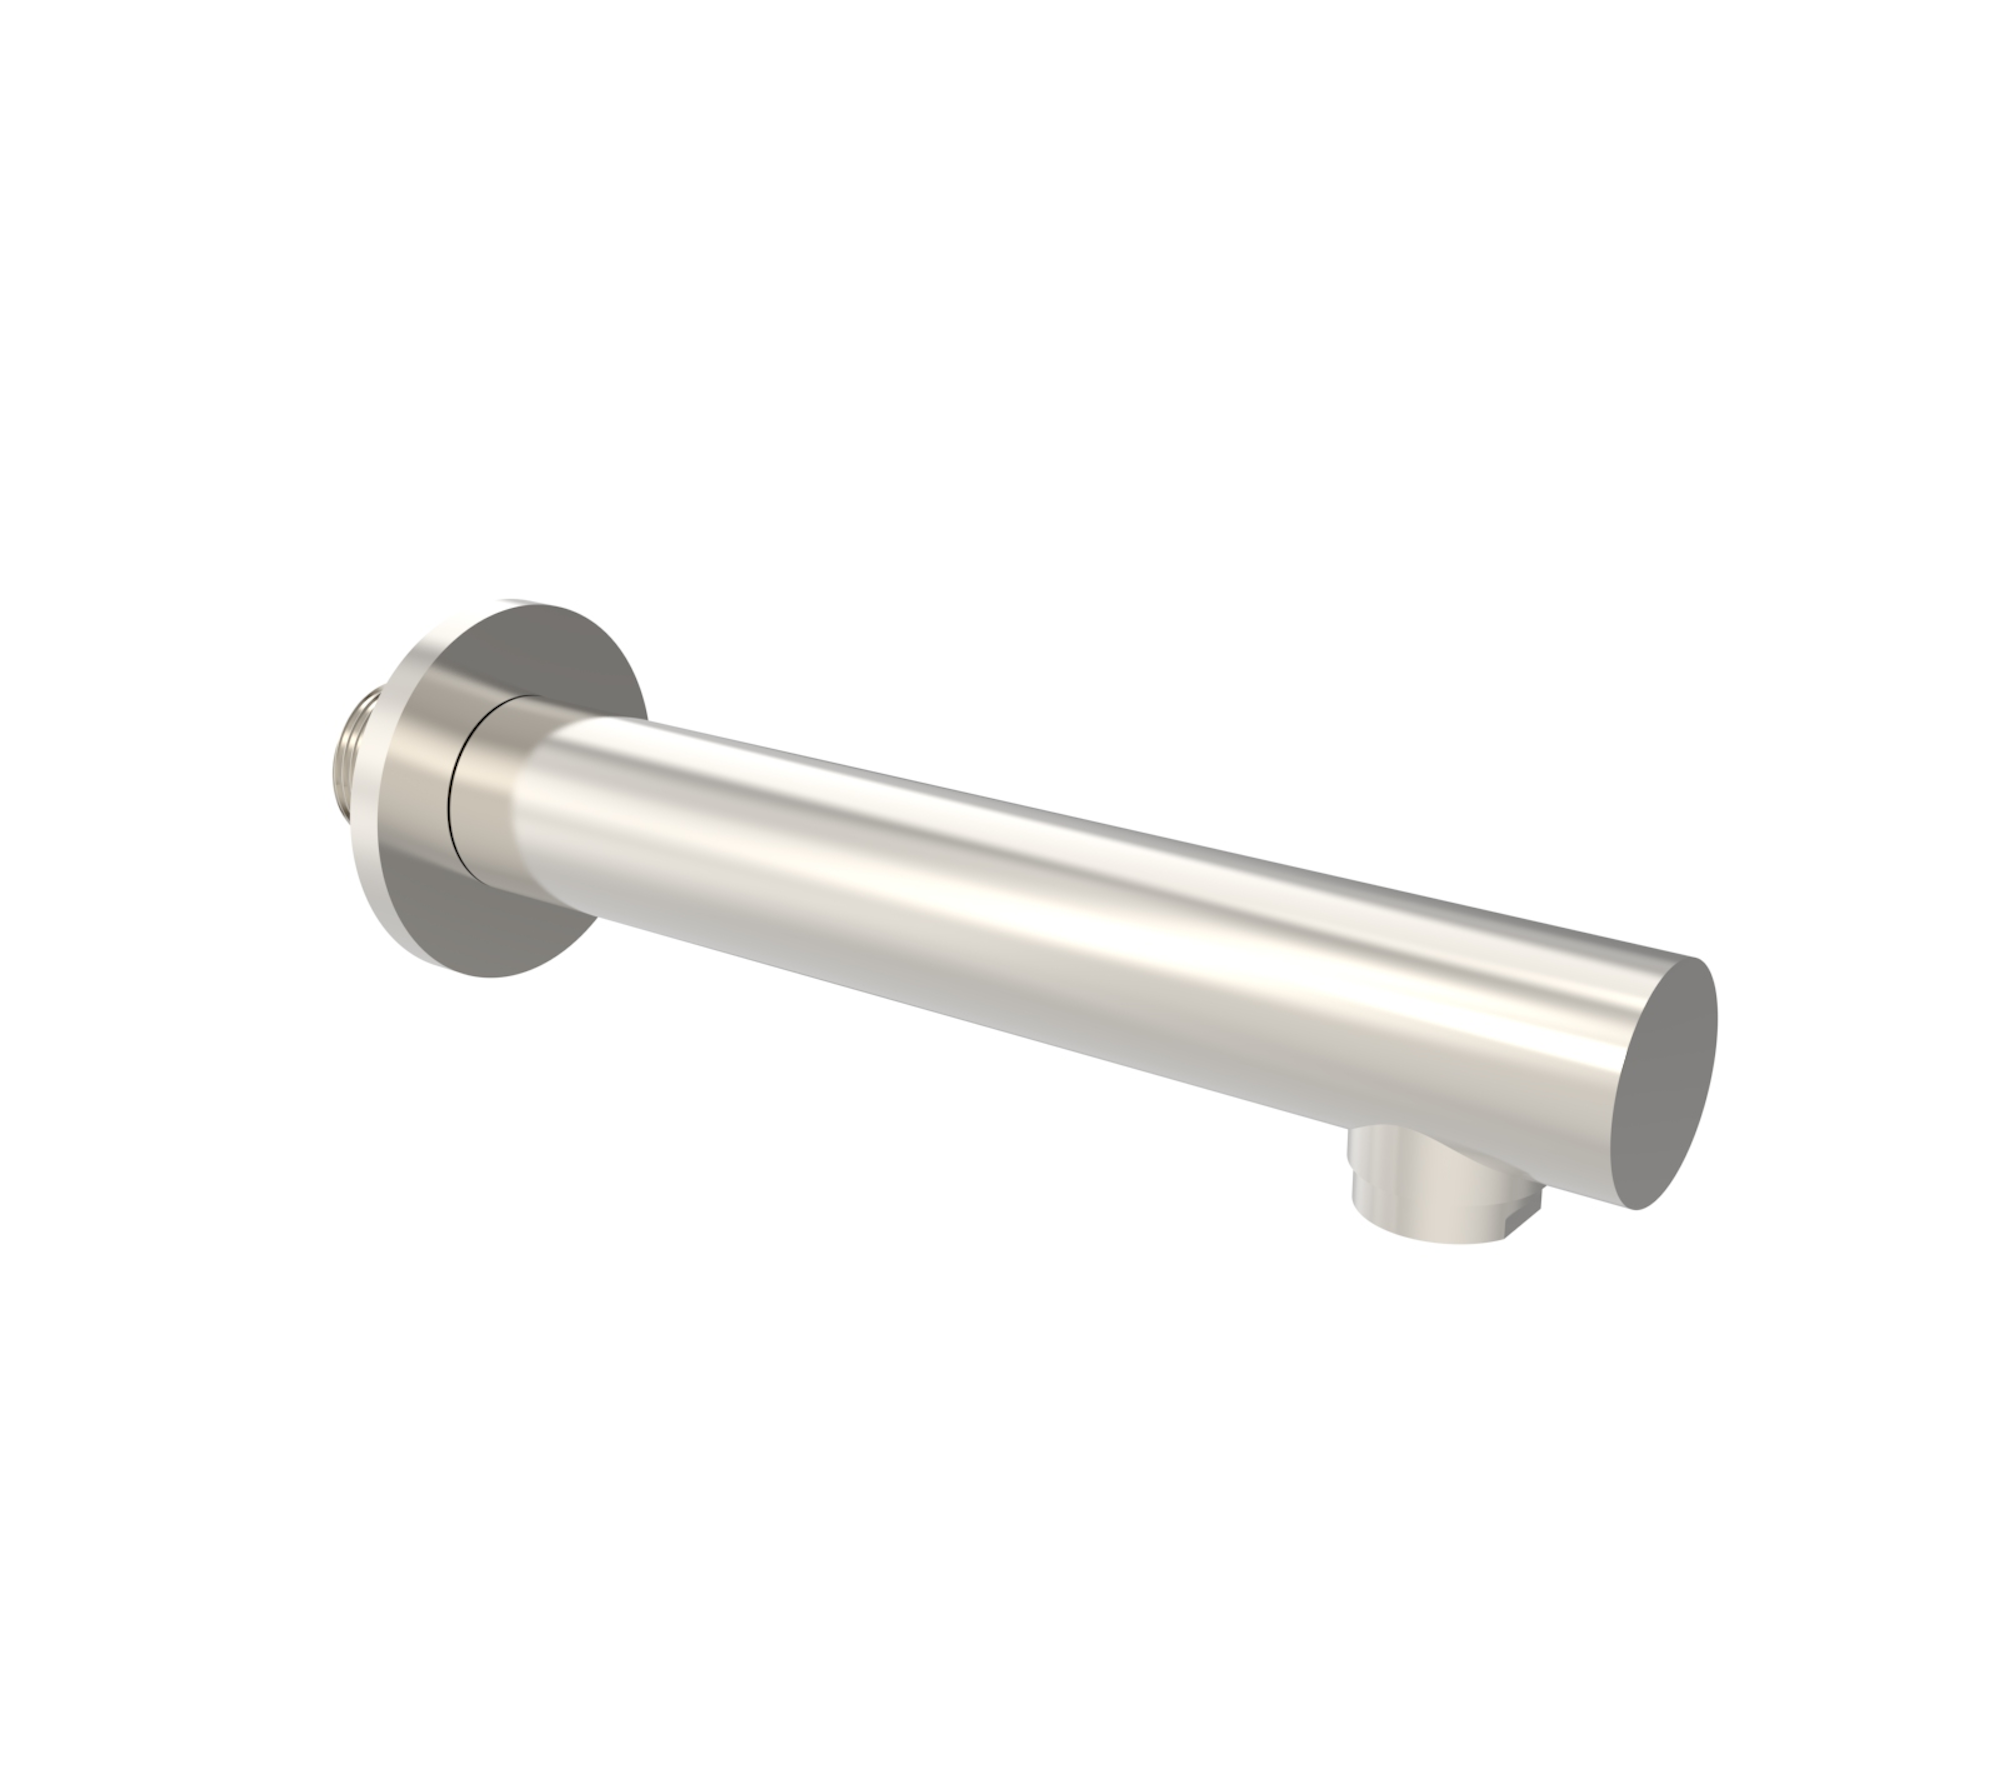 COS 220mm round bath spout - Brushed Nickel